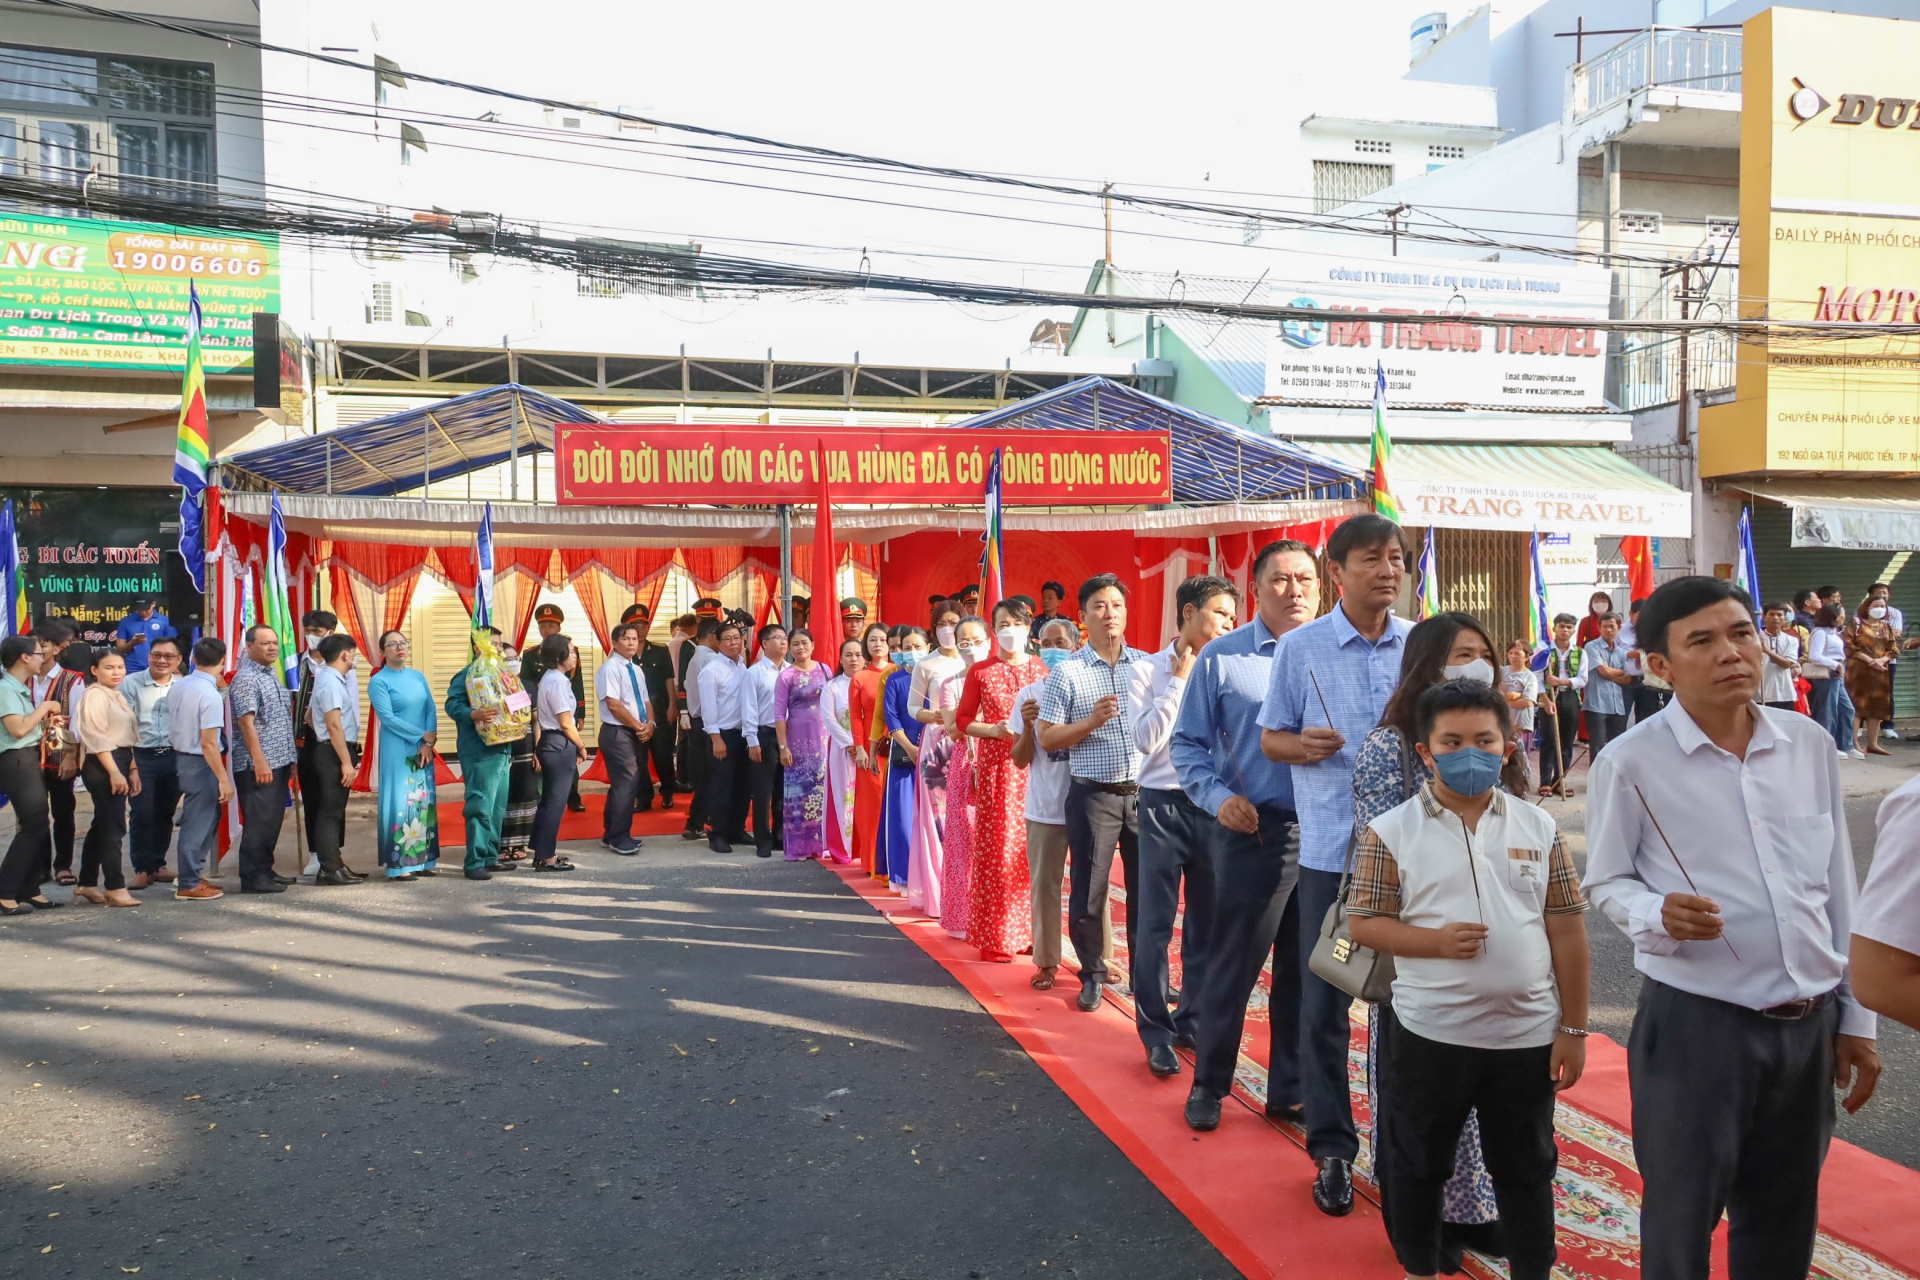 A lot of people attend Hung Kings’ death anniversary 2023

